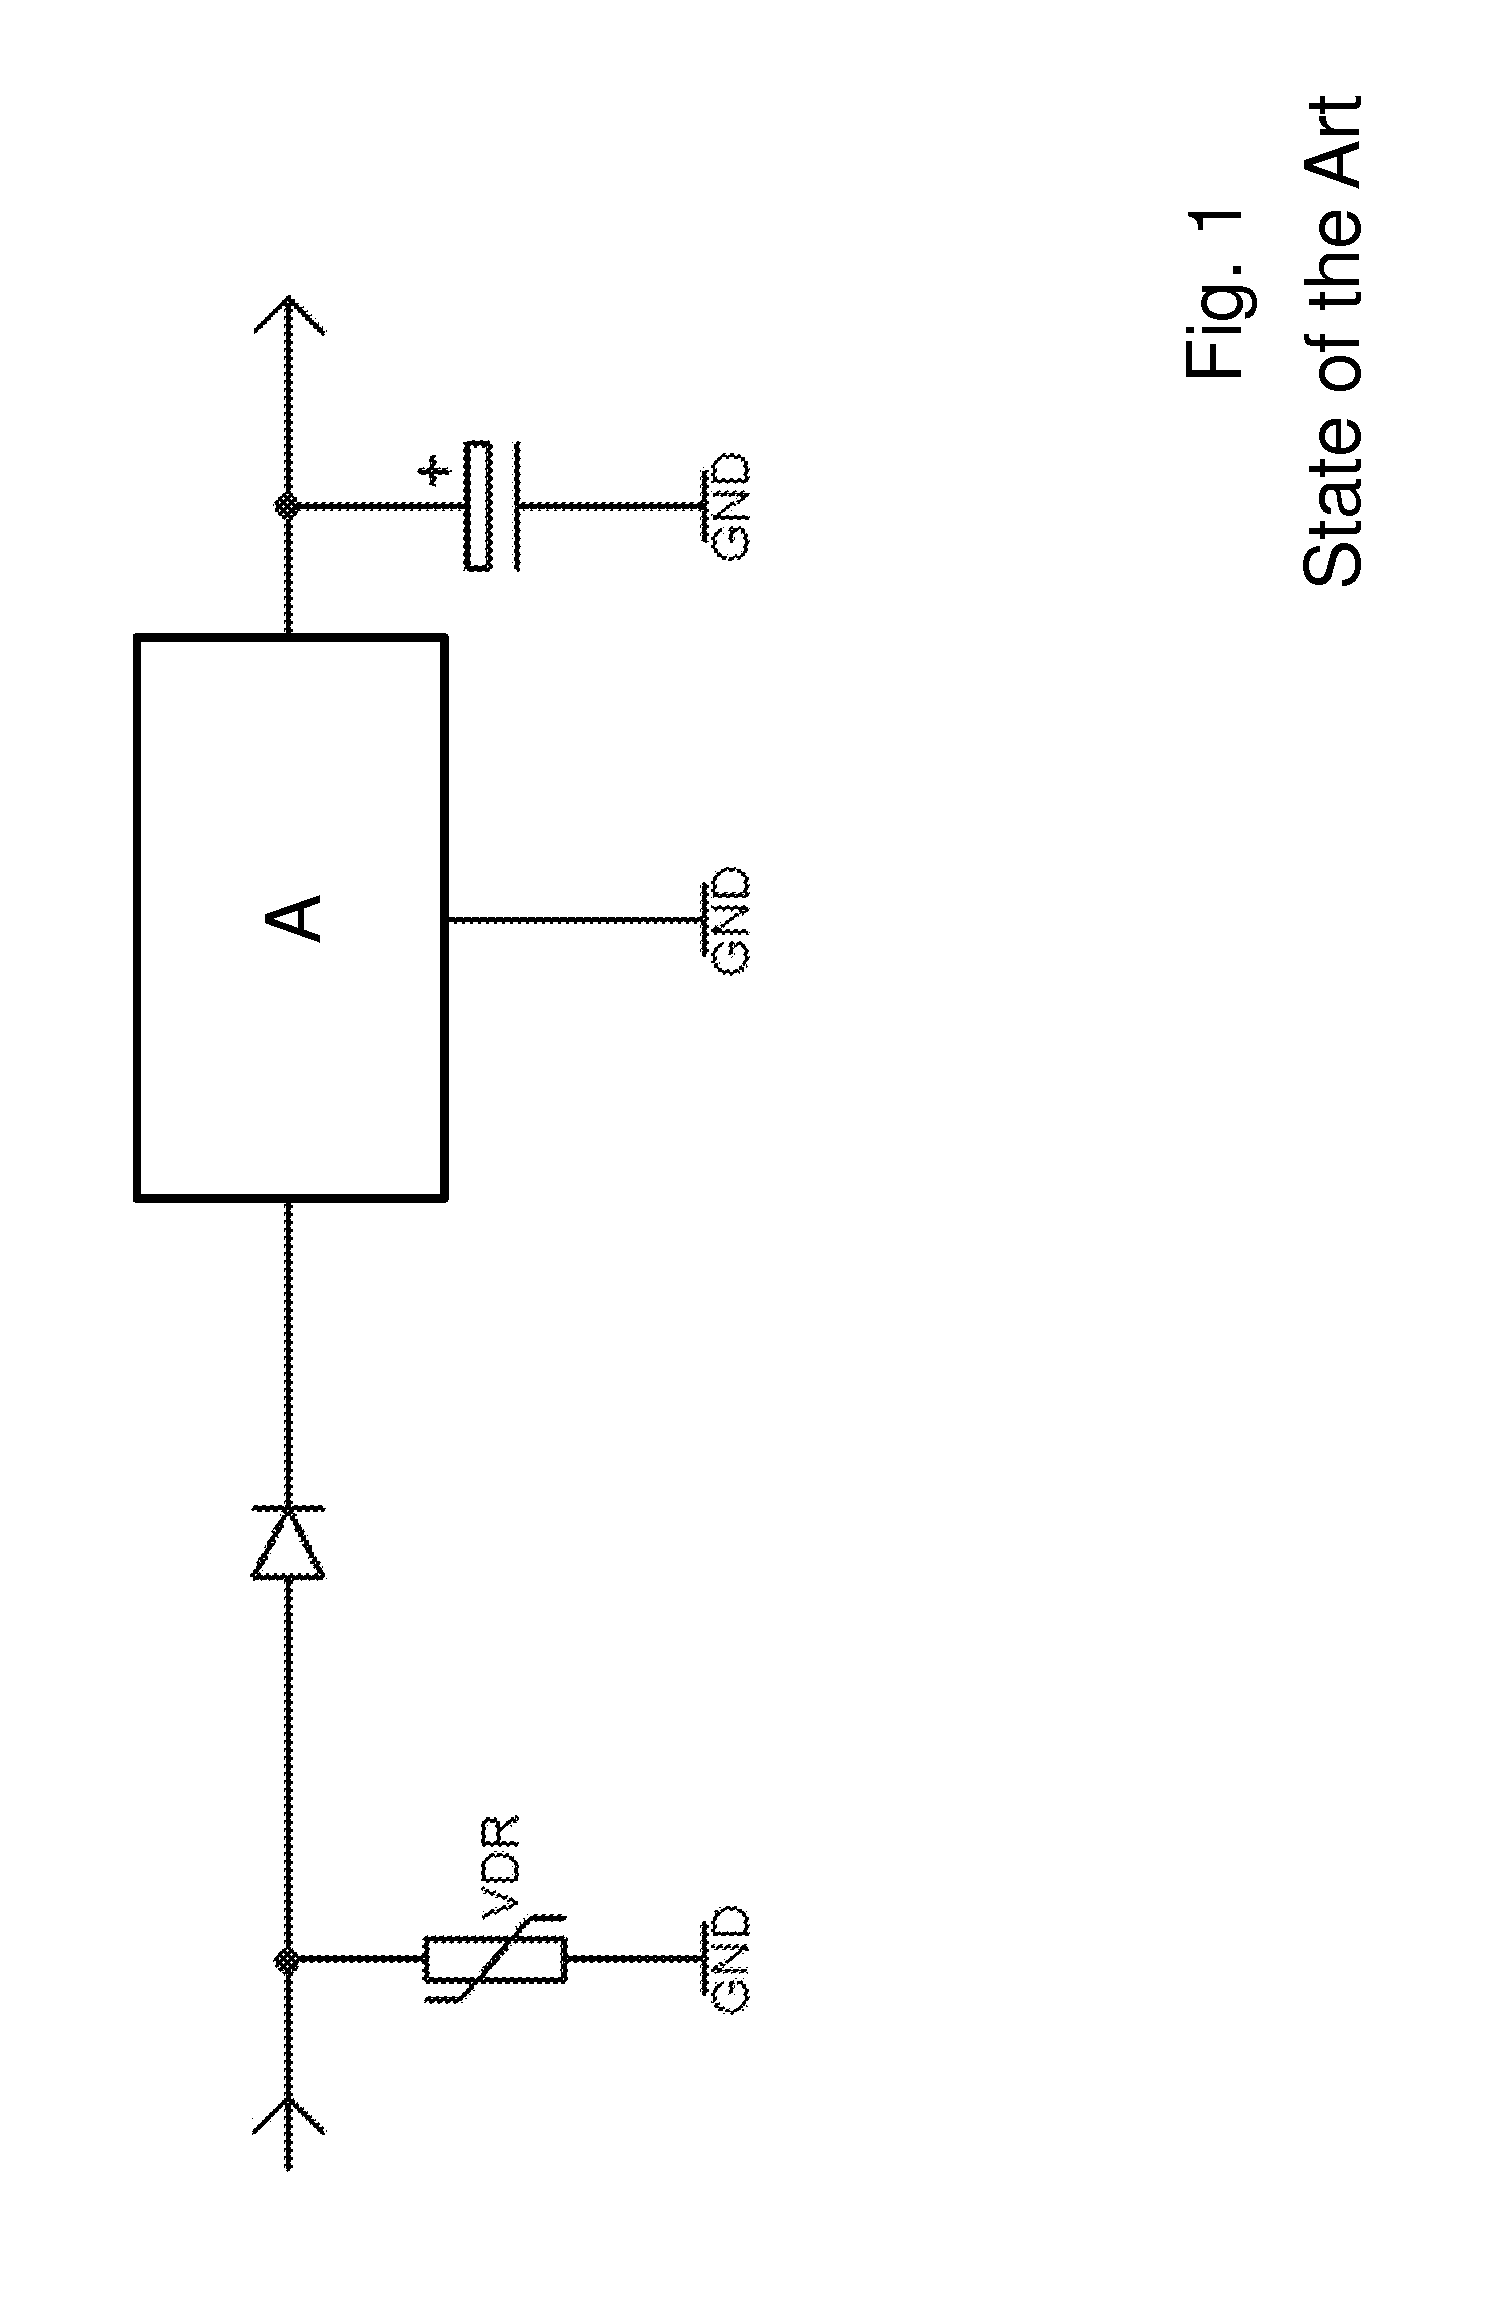 Circuit for protecting an electric load from overvoltages